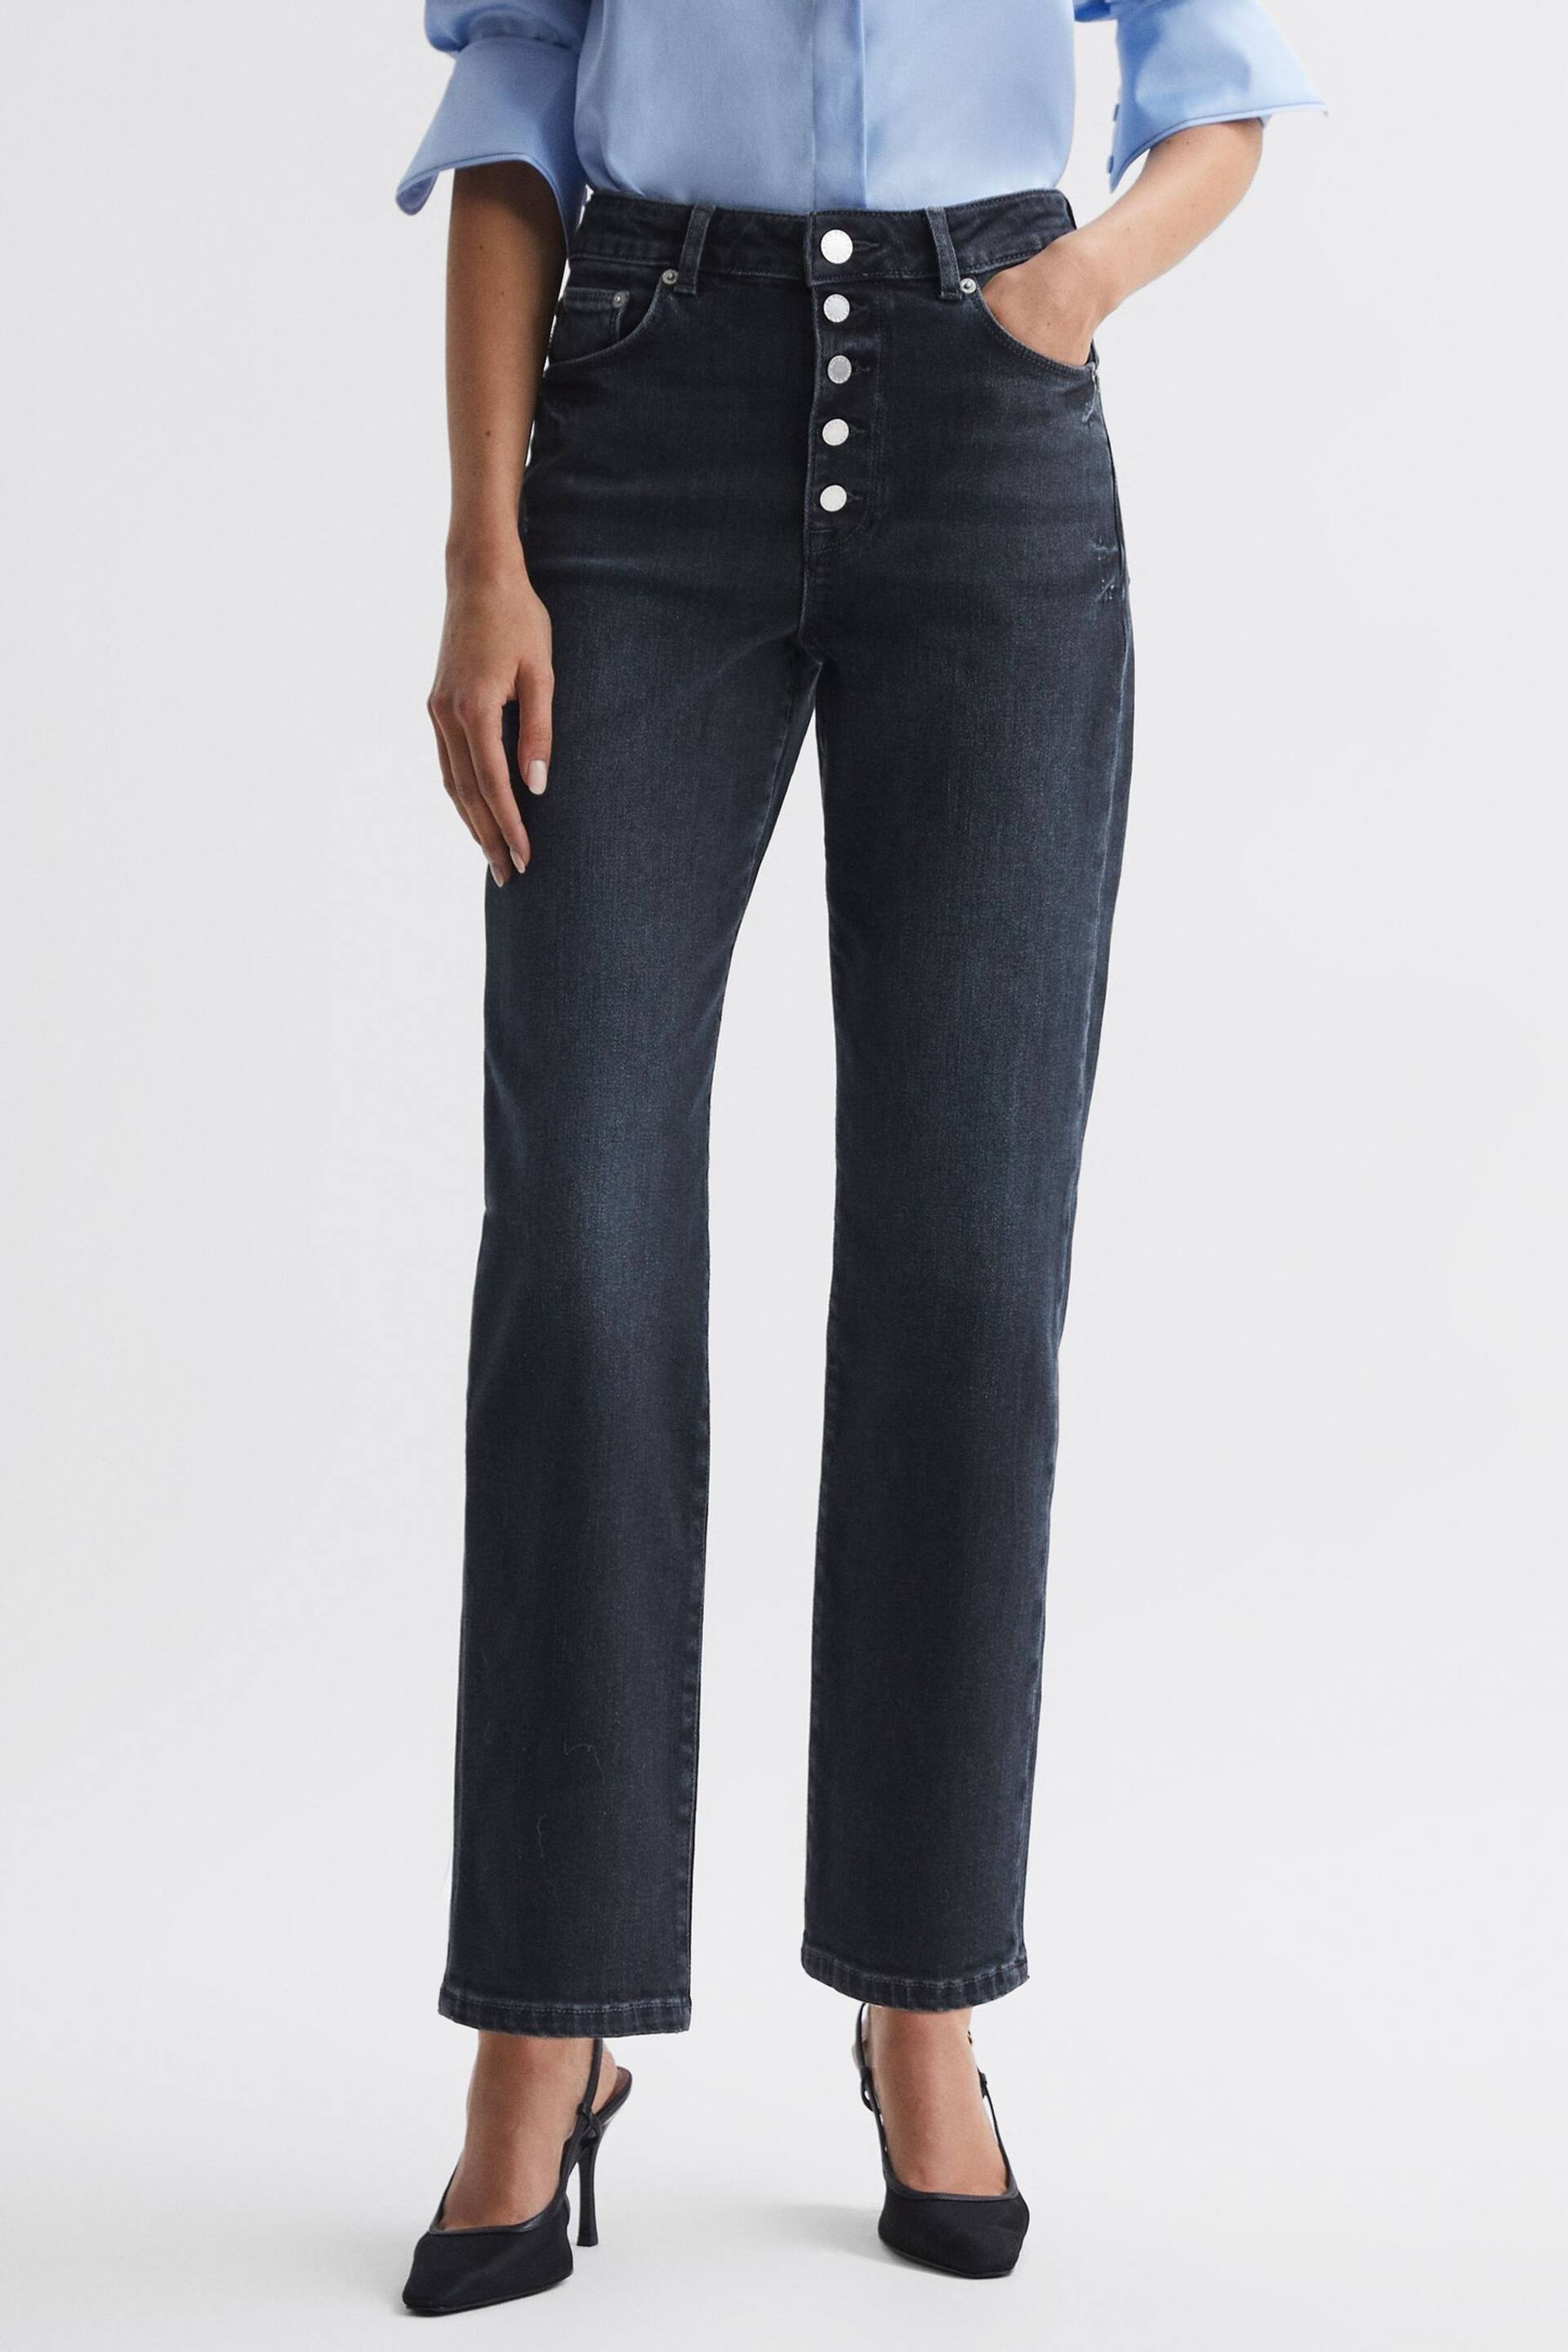 Reiss Black Maisie Cropped Mid Rise Straight Leg Jeans - Image 1 of 6